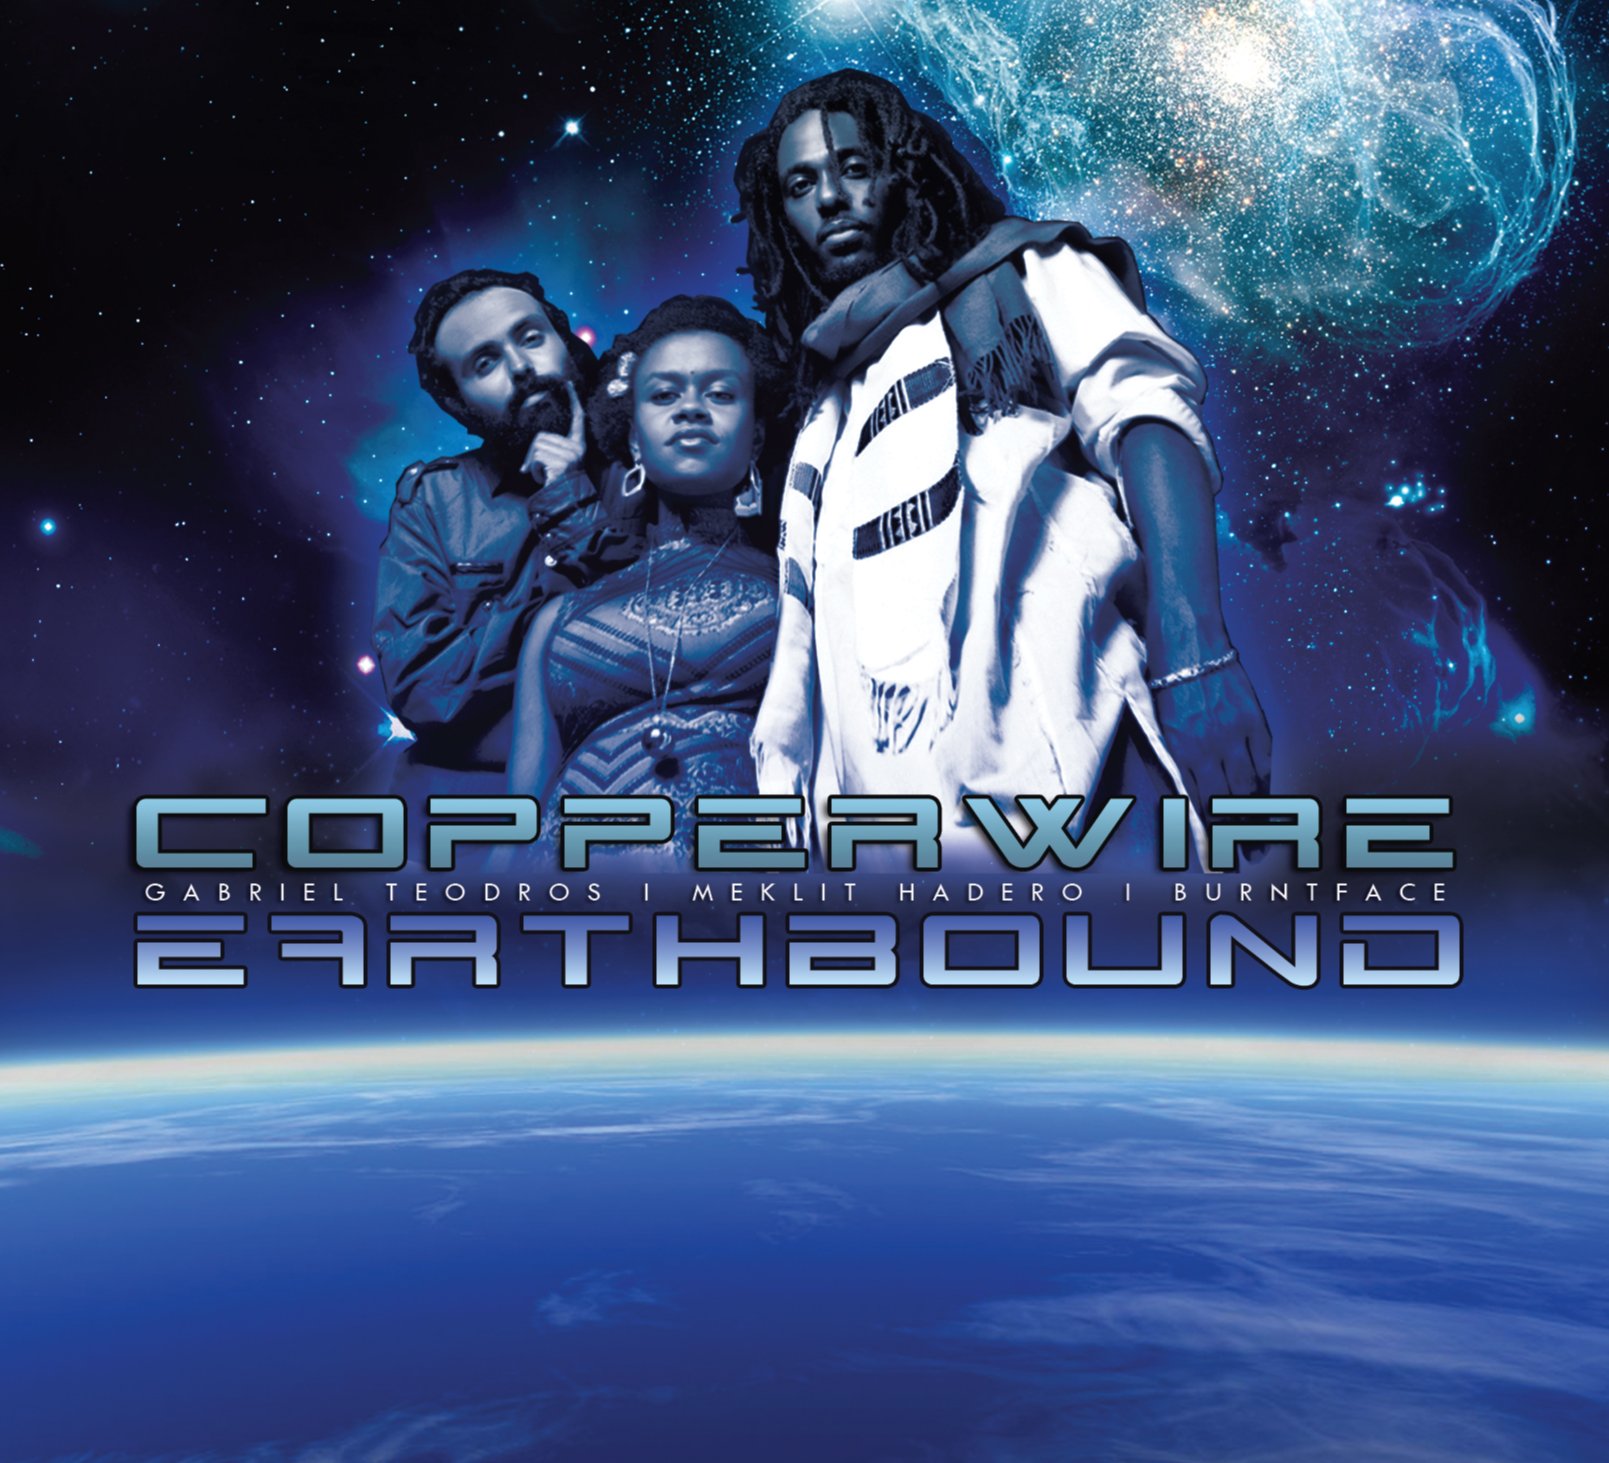 copperwire-earthbound-cover-high-res.jpg